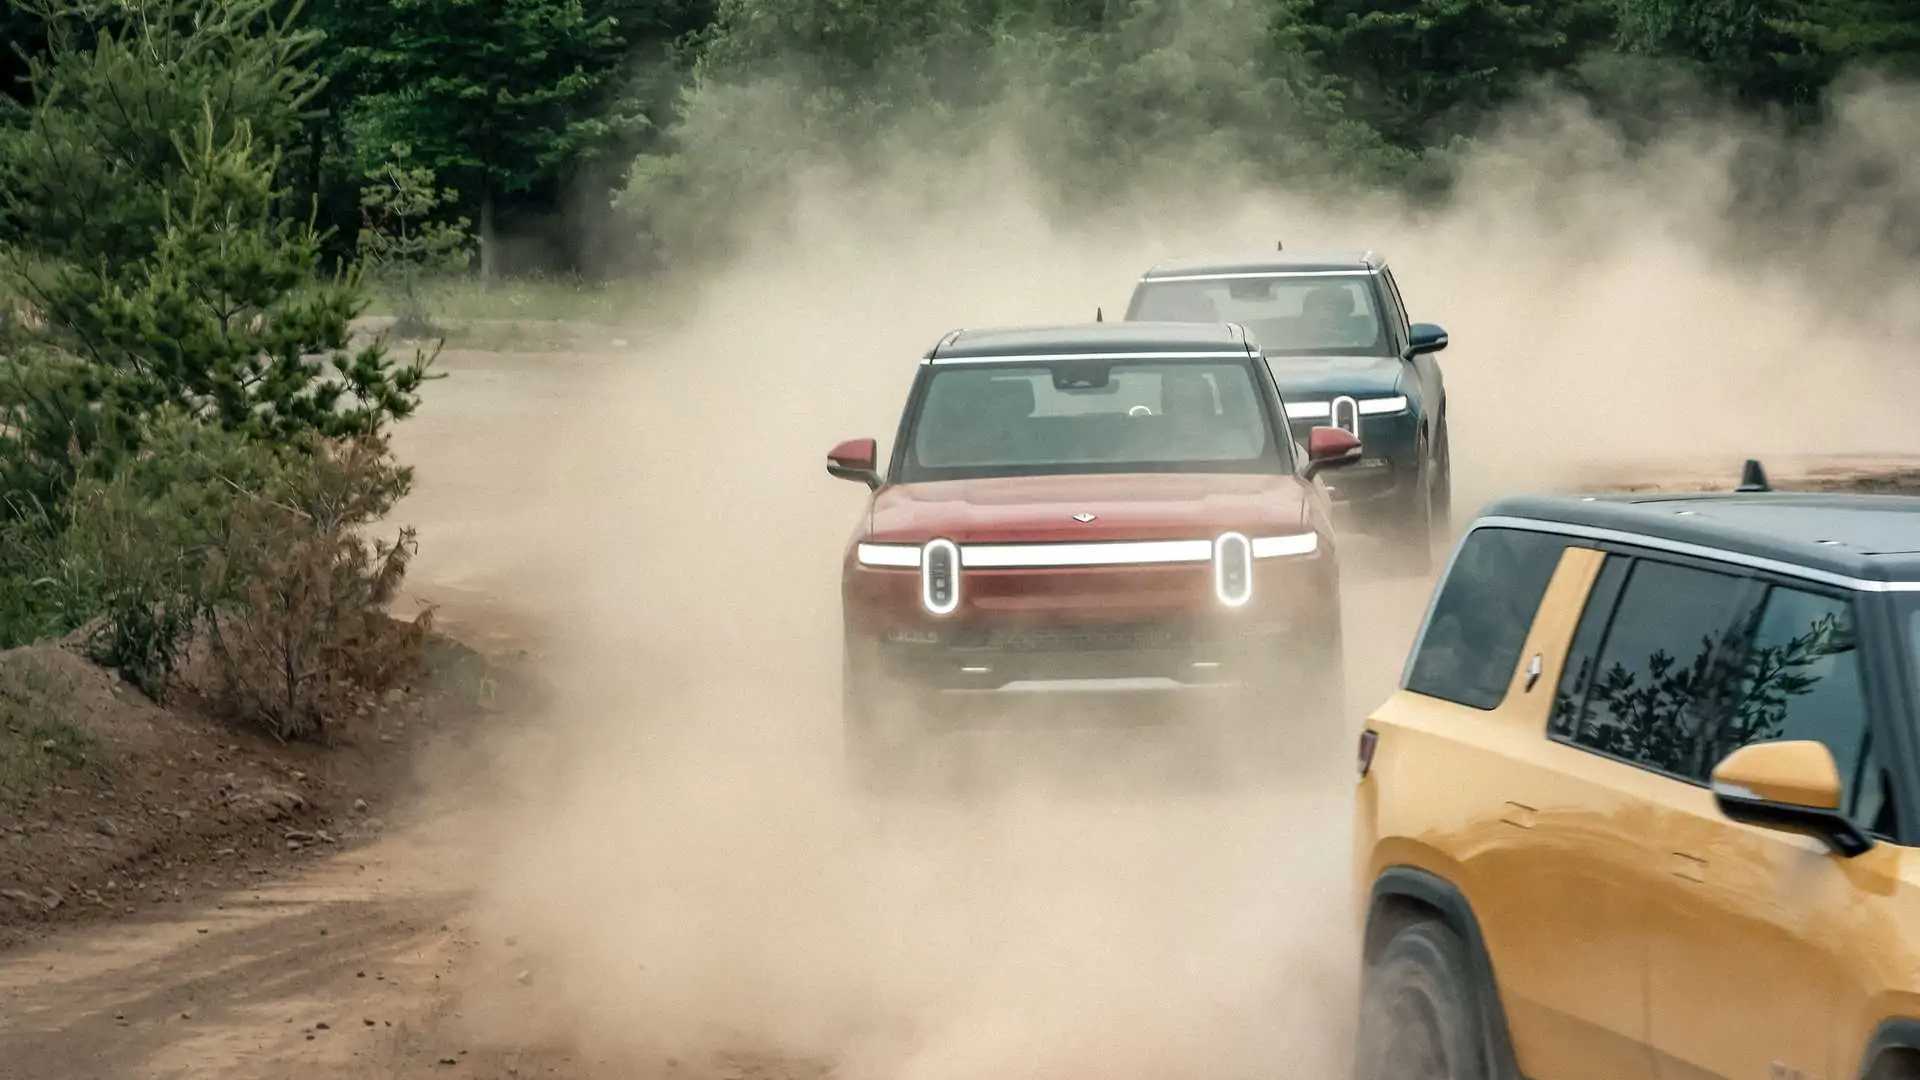 rivian recalls the r1s because the side airbags might be improperly fastened